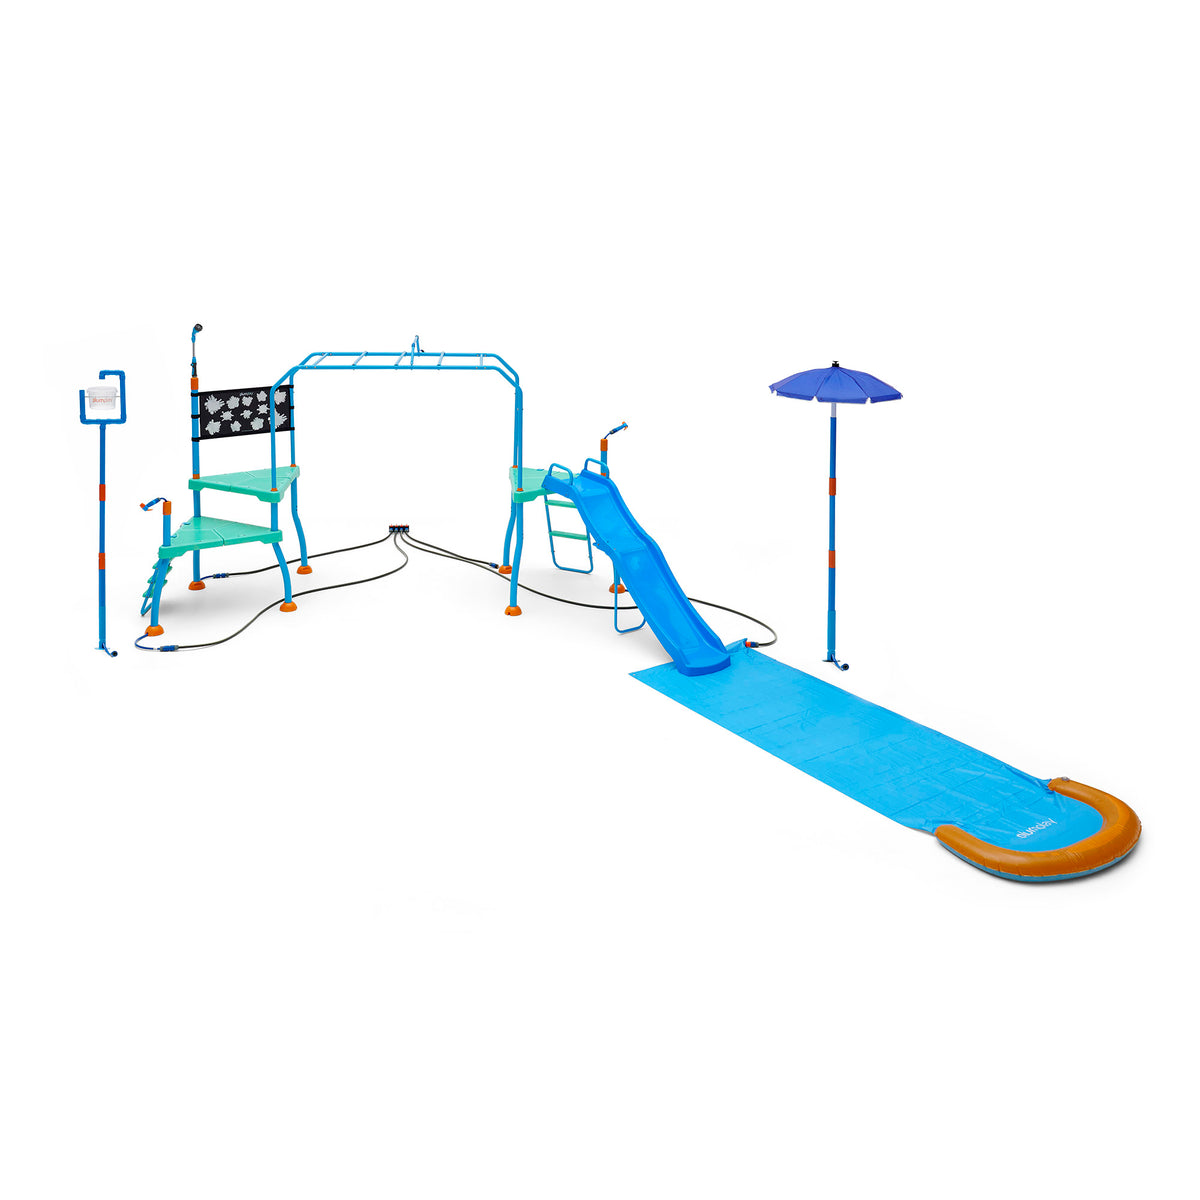 Water Park Blaster Course by Plum Play